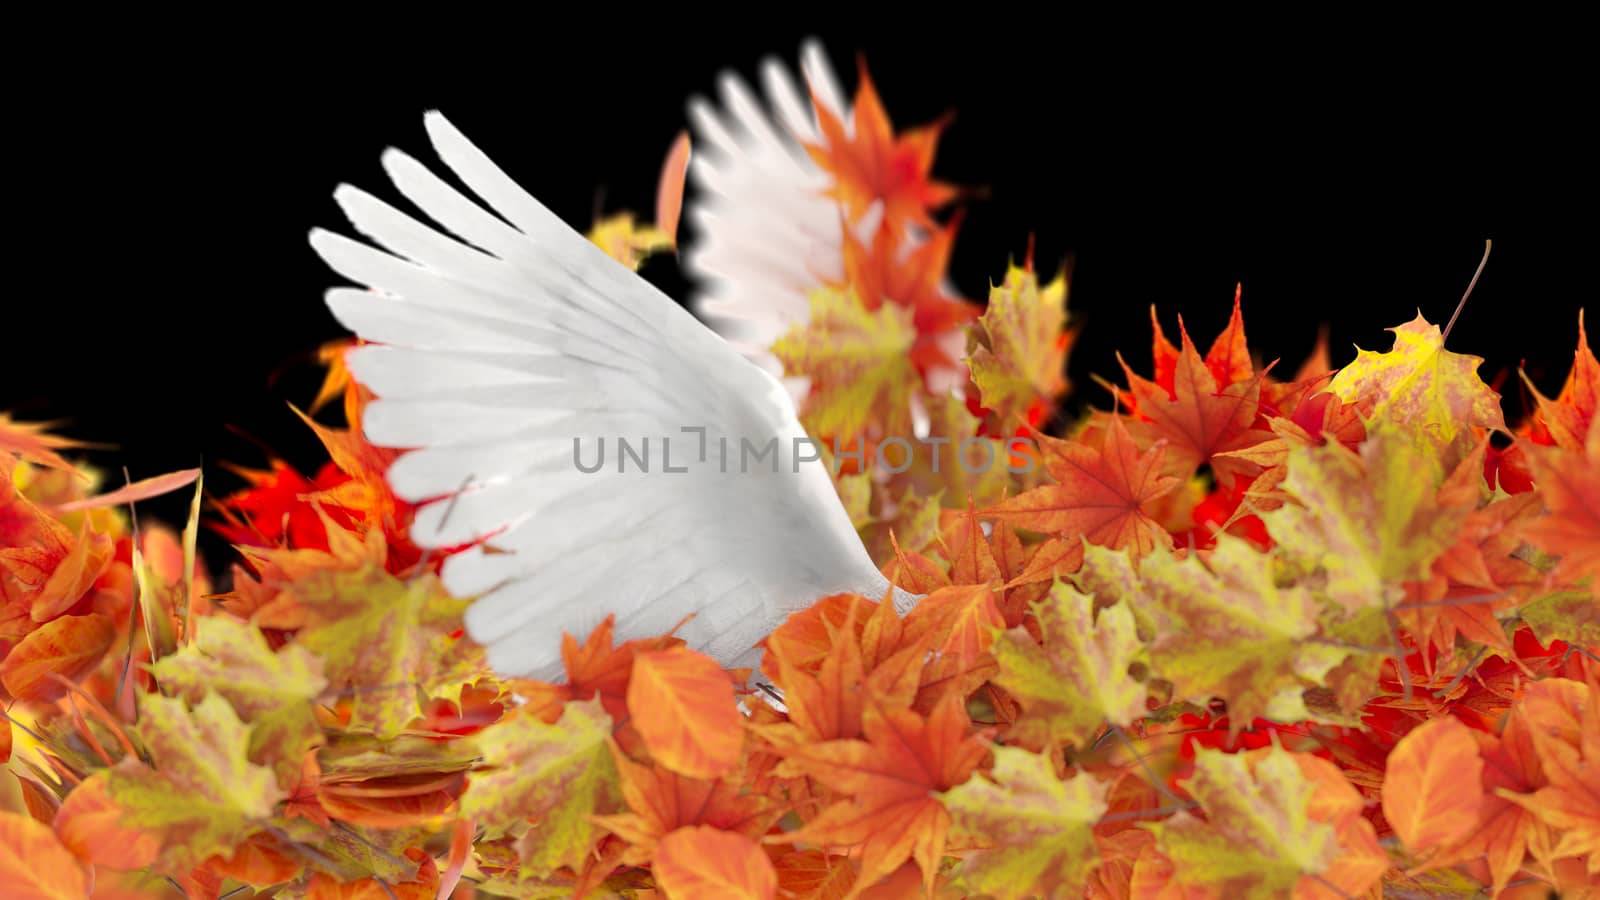 Isolated Autumn Leaves and dove wings on black conceptual background by denisgo